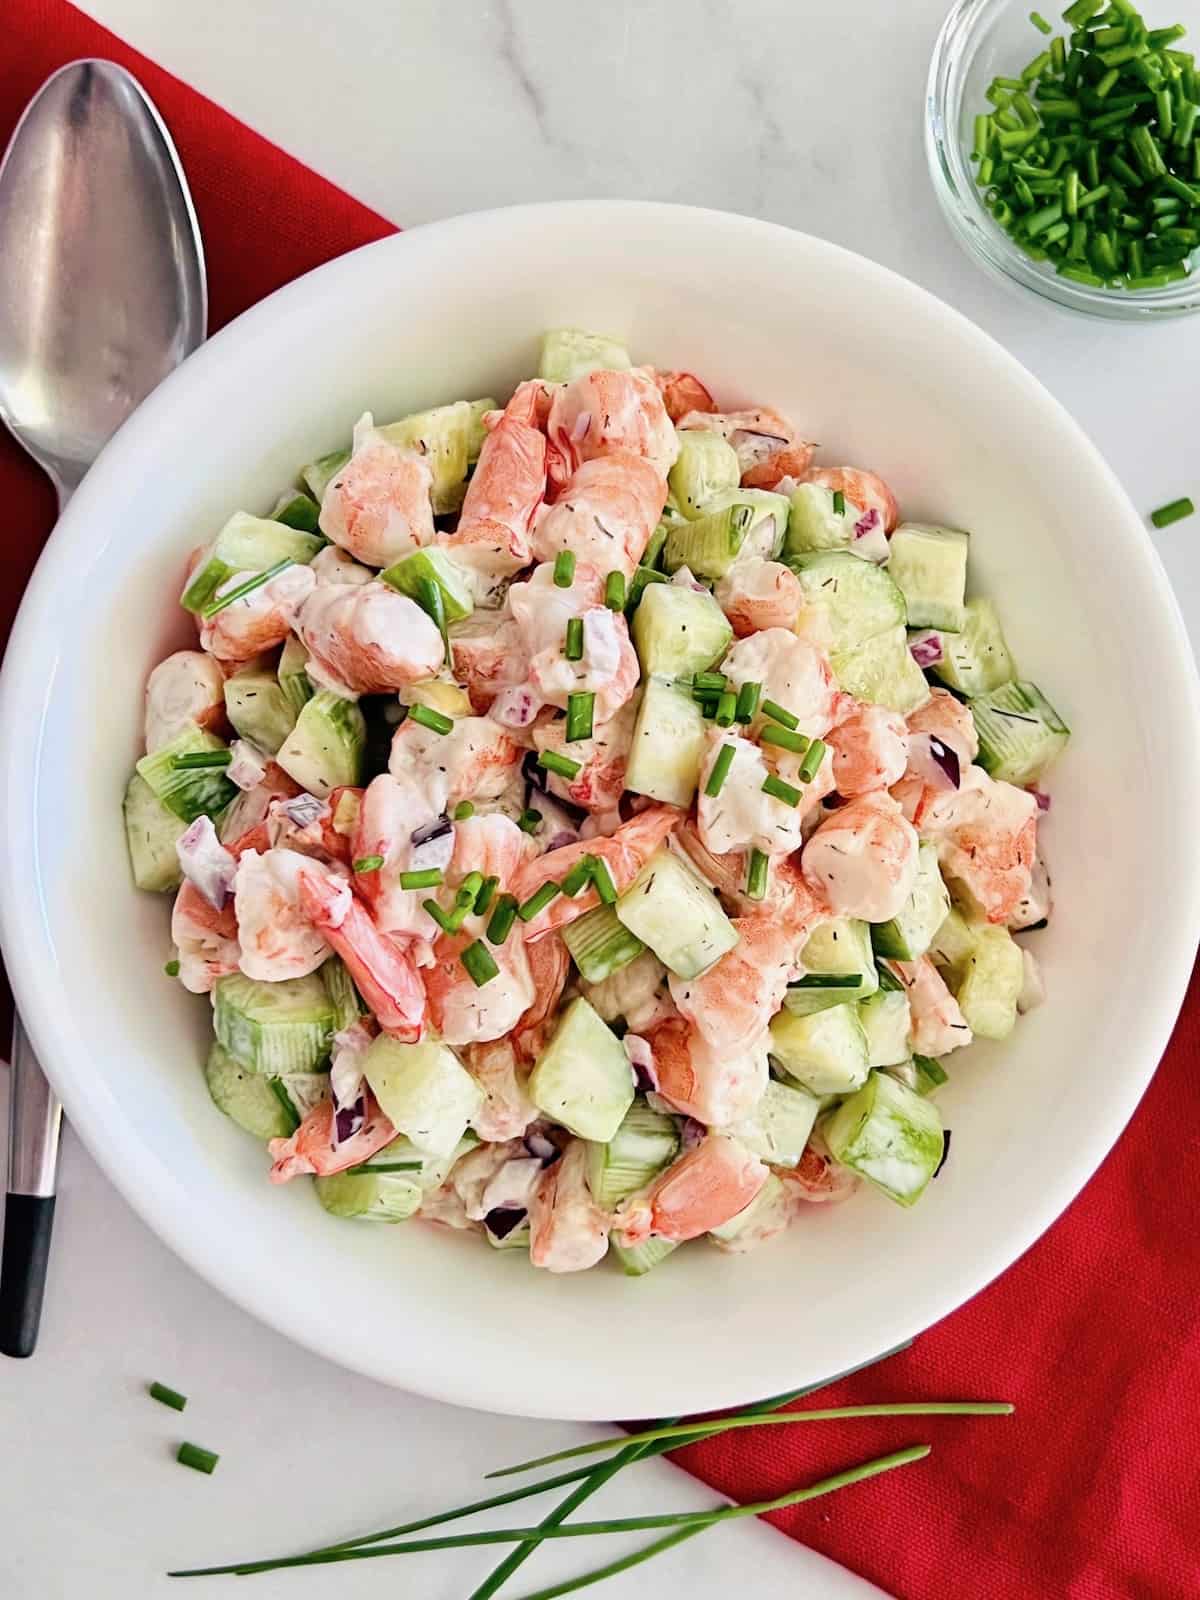 Cucumber Shrimp Salad with red napkin spoon and side bowl of fresh chives.